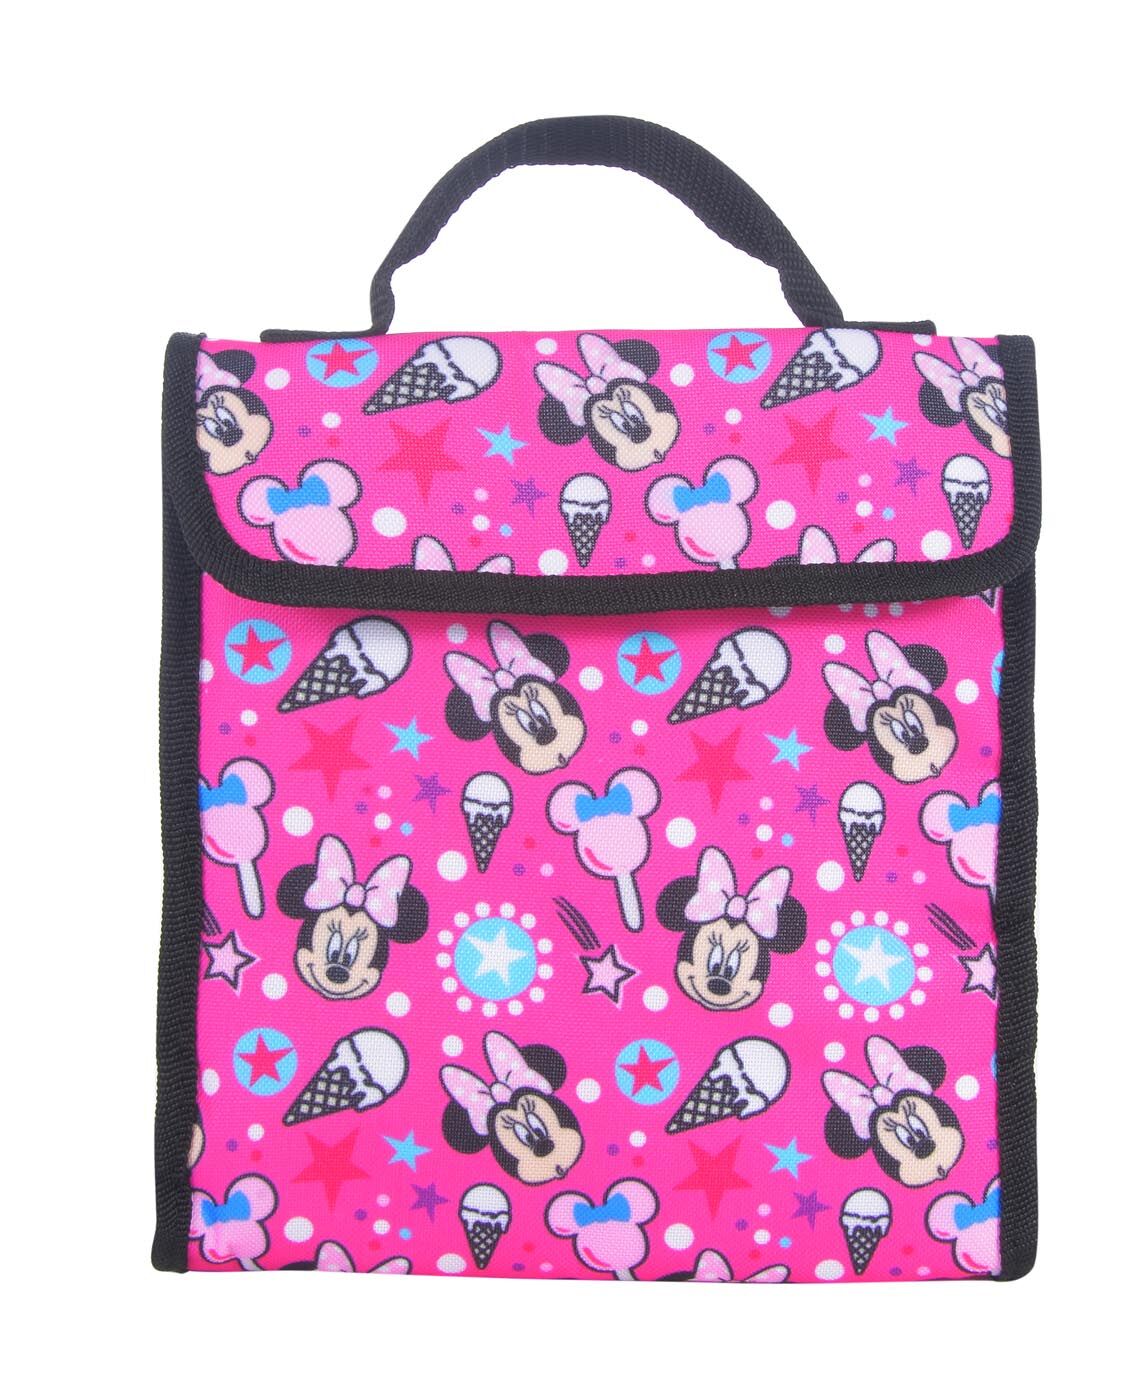 Disney Minnie Mouse 5 Piece Backpack Set - image 4 of 6